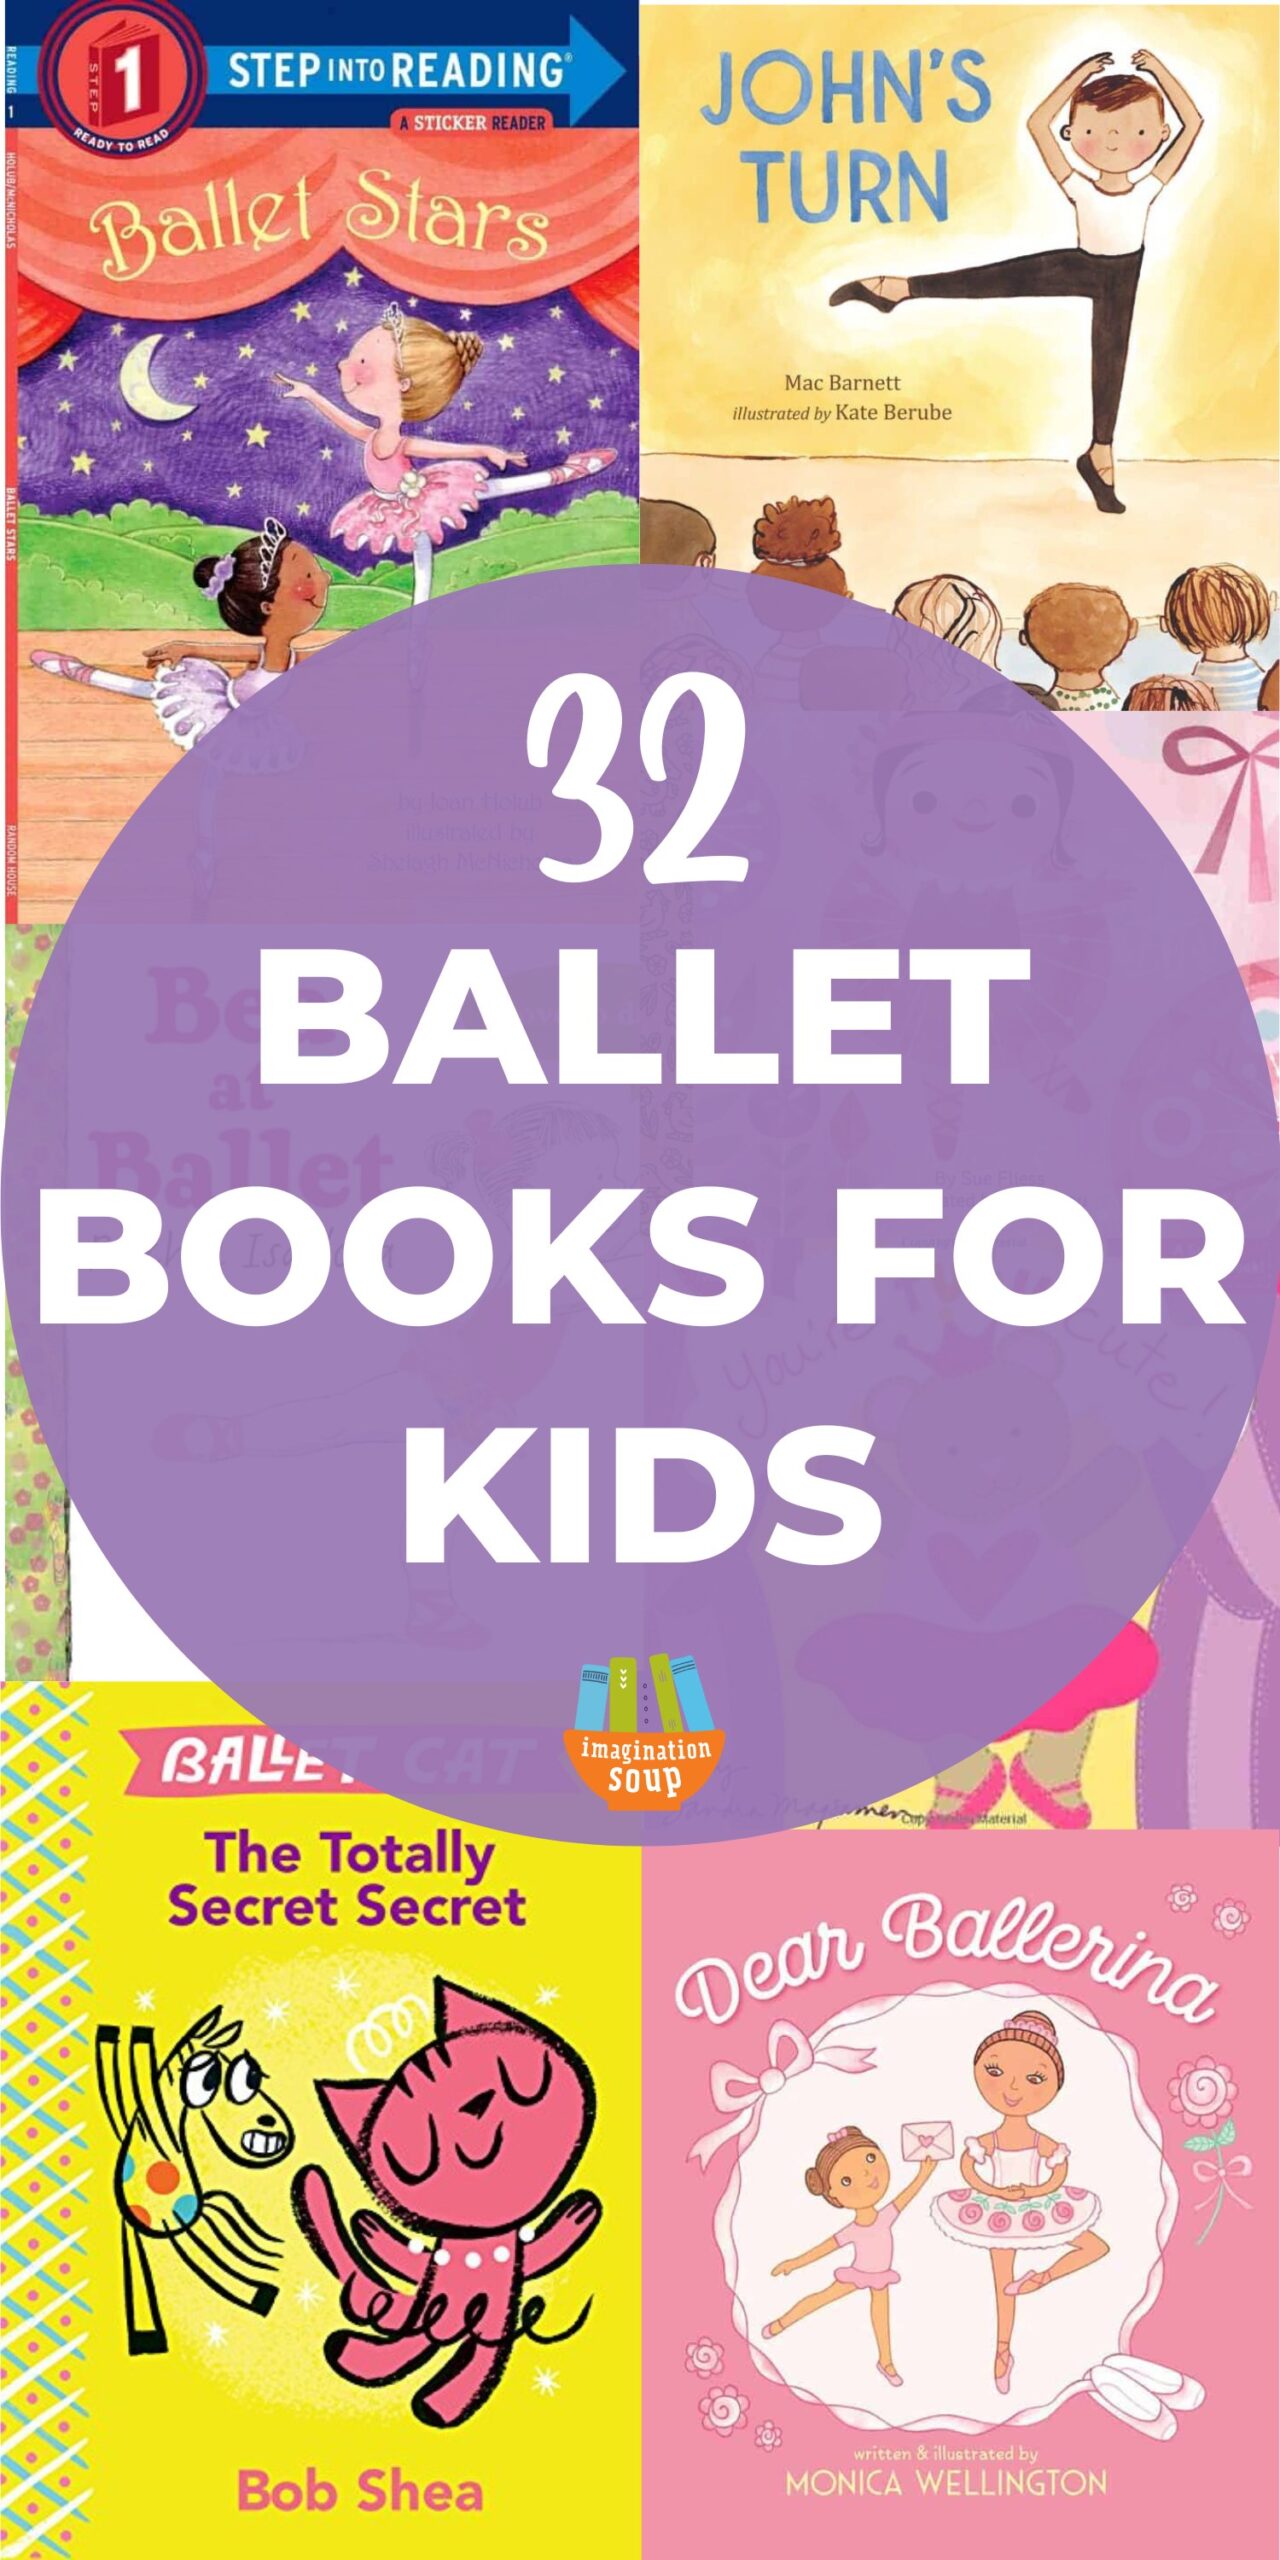 Do you want to find the best ballet kids' books? If you know any young ballerinas who would love to read books about ballet, try reading the picture books, chapter books, middle grade books, and YA books on this list.